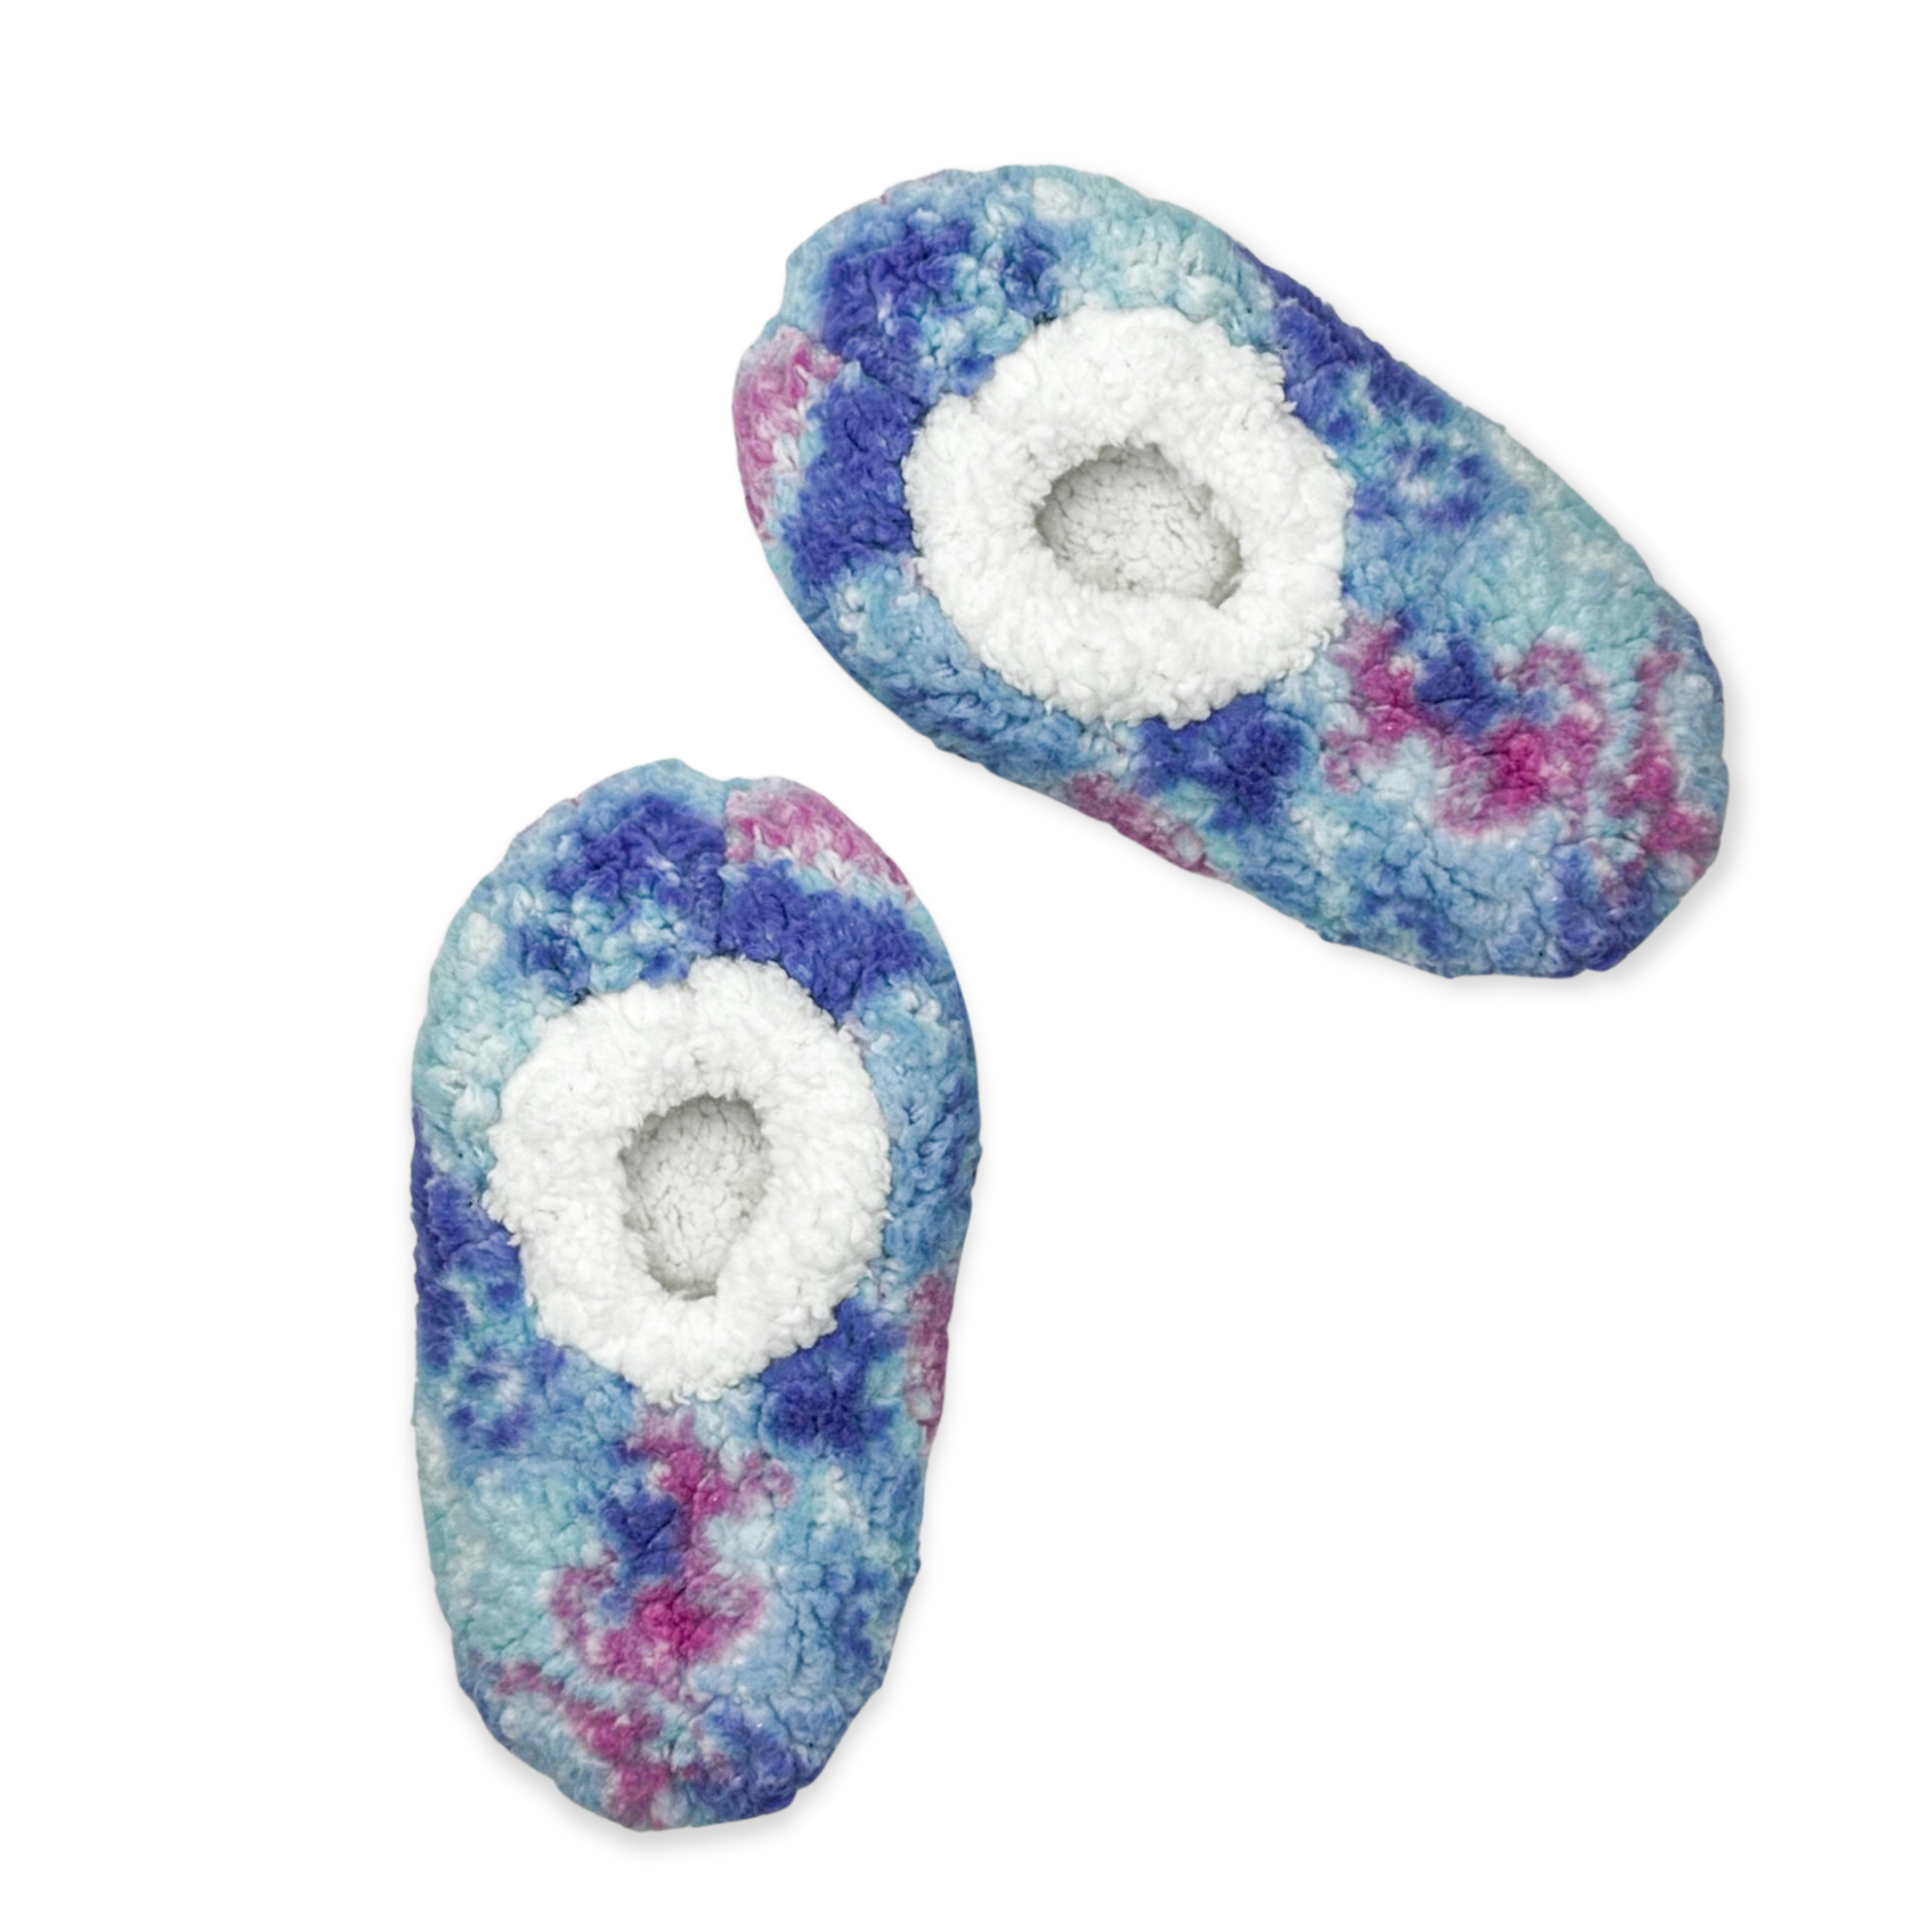 The image depicts a pair of galaxy tie dye slippers. The slippers are made of a soft, fuzzy material and have a closed toe design. They are perfect for keeping your feet warm and cozy on cold days.